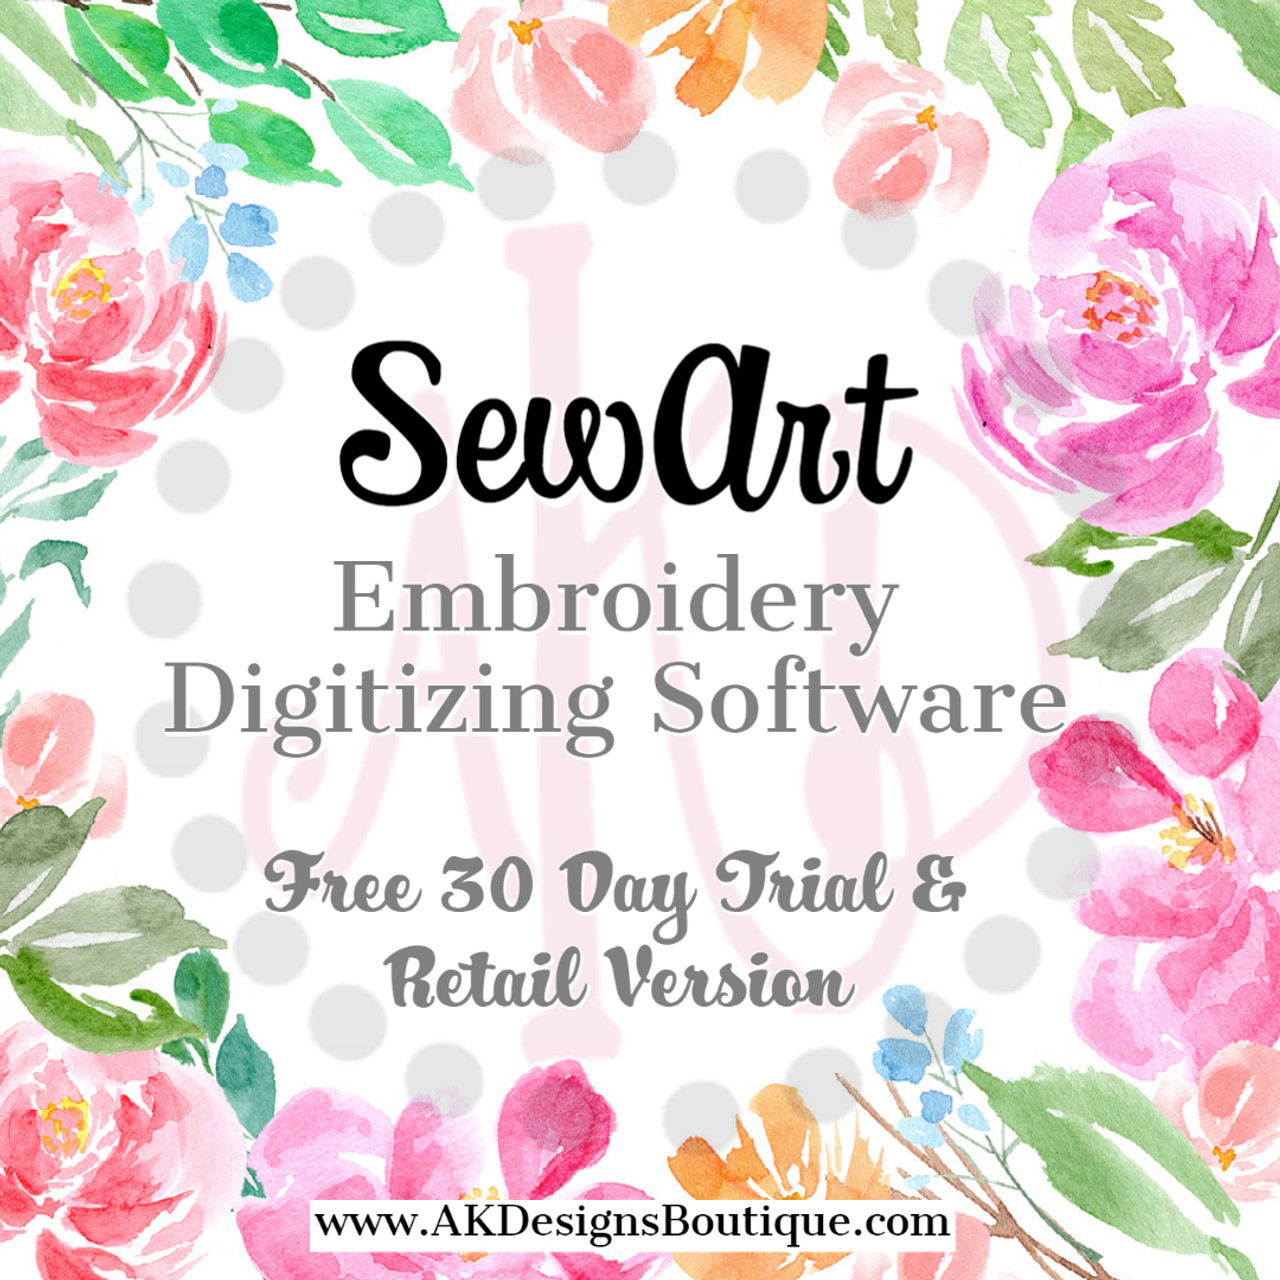 embroidery digitizing software reviews 2017